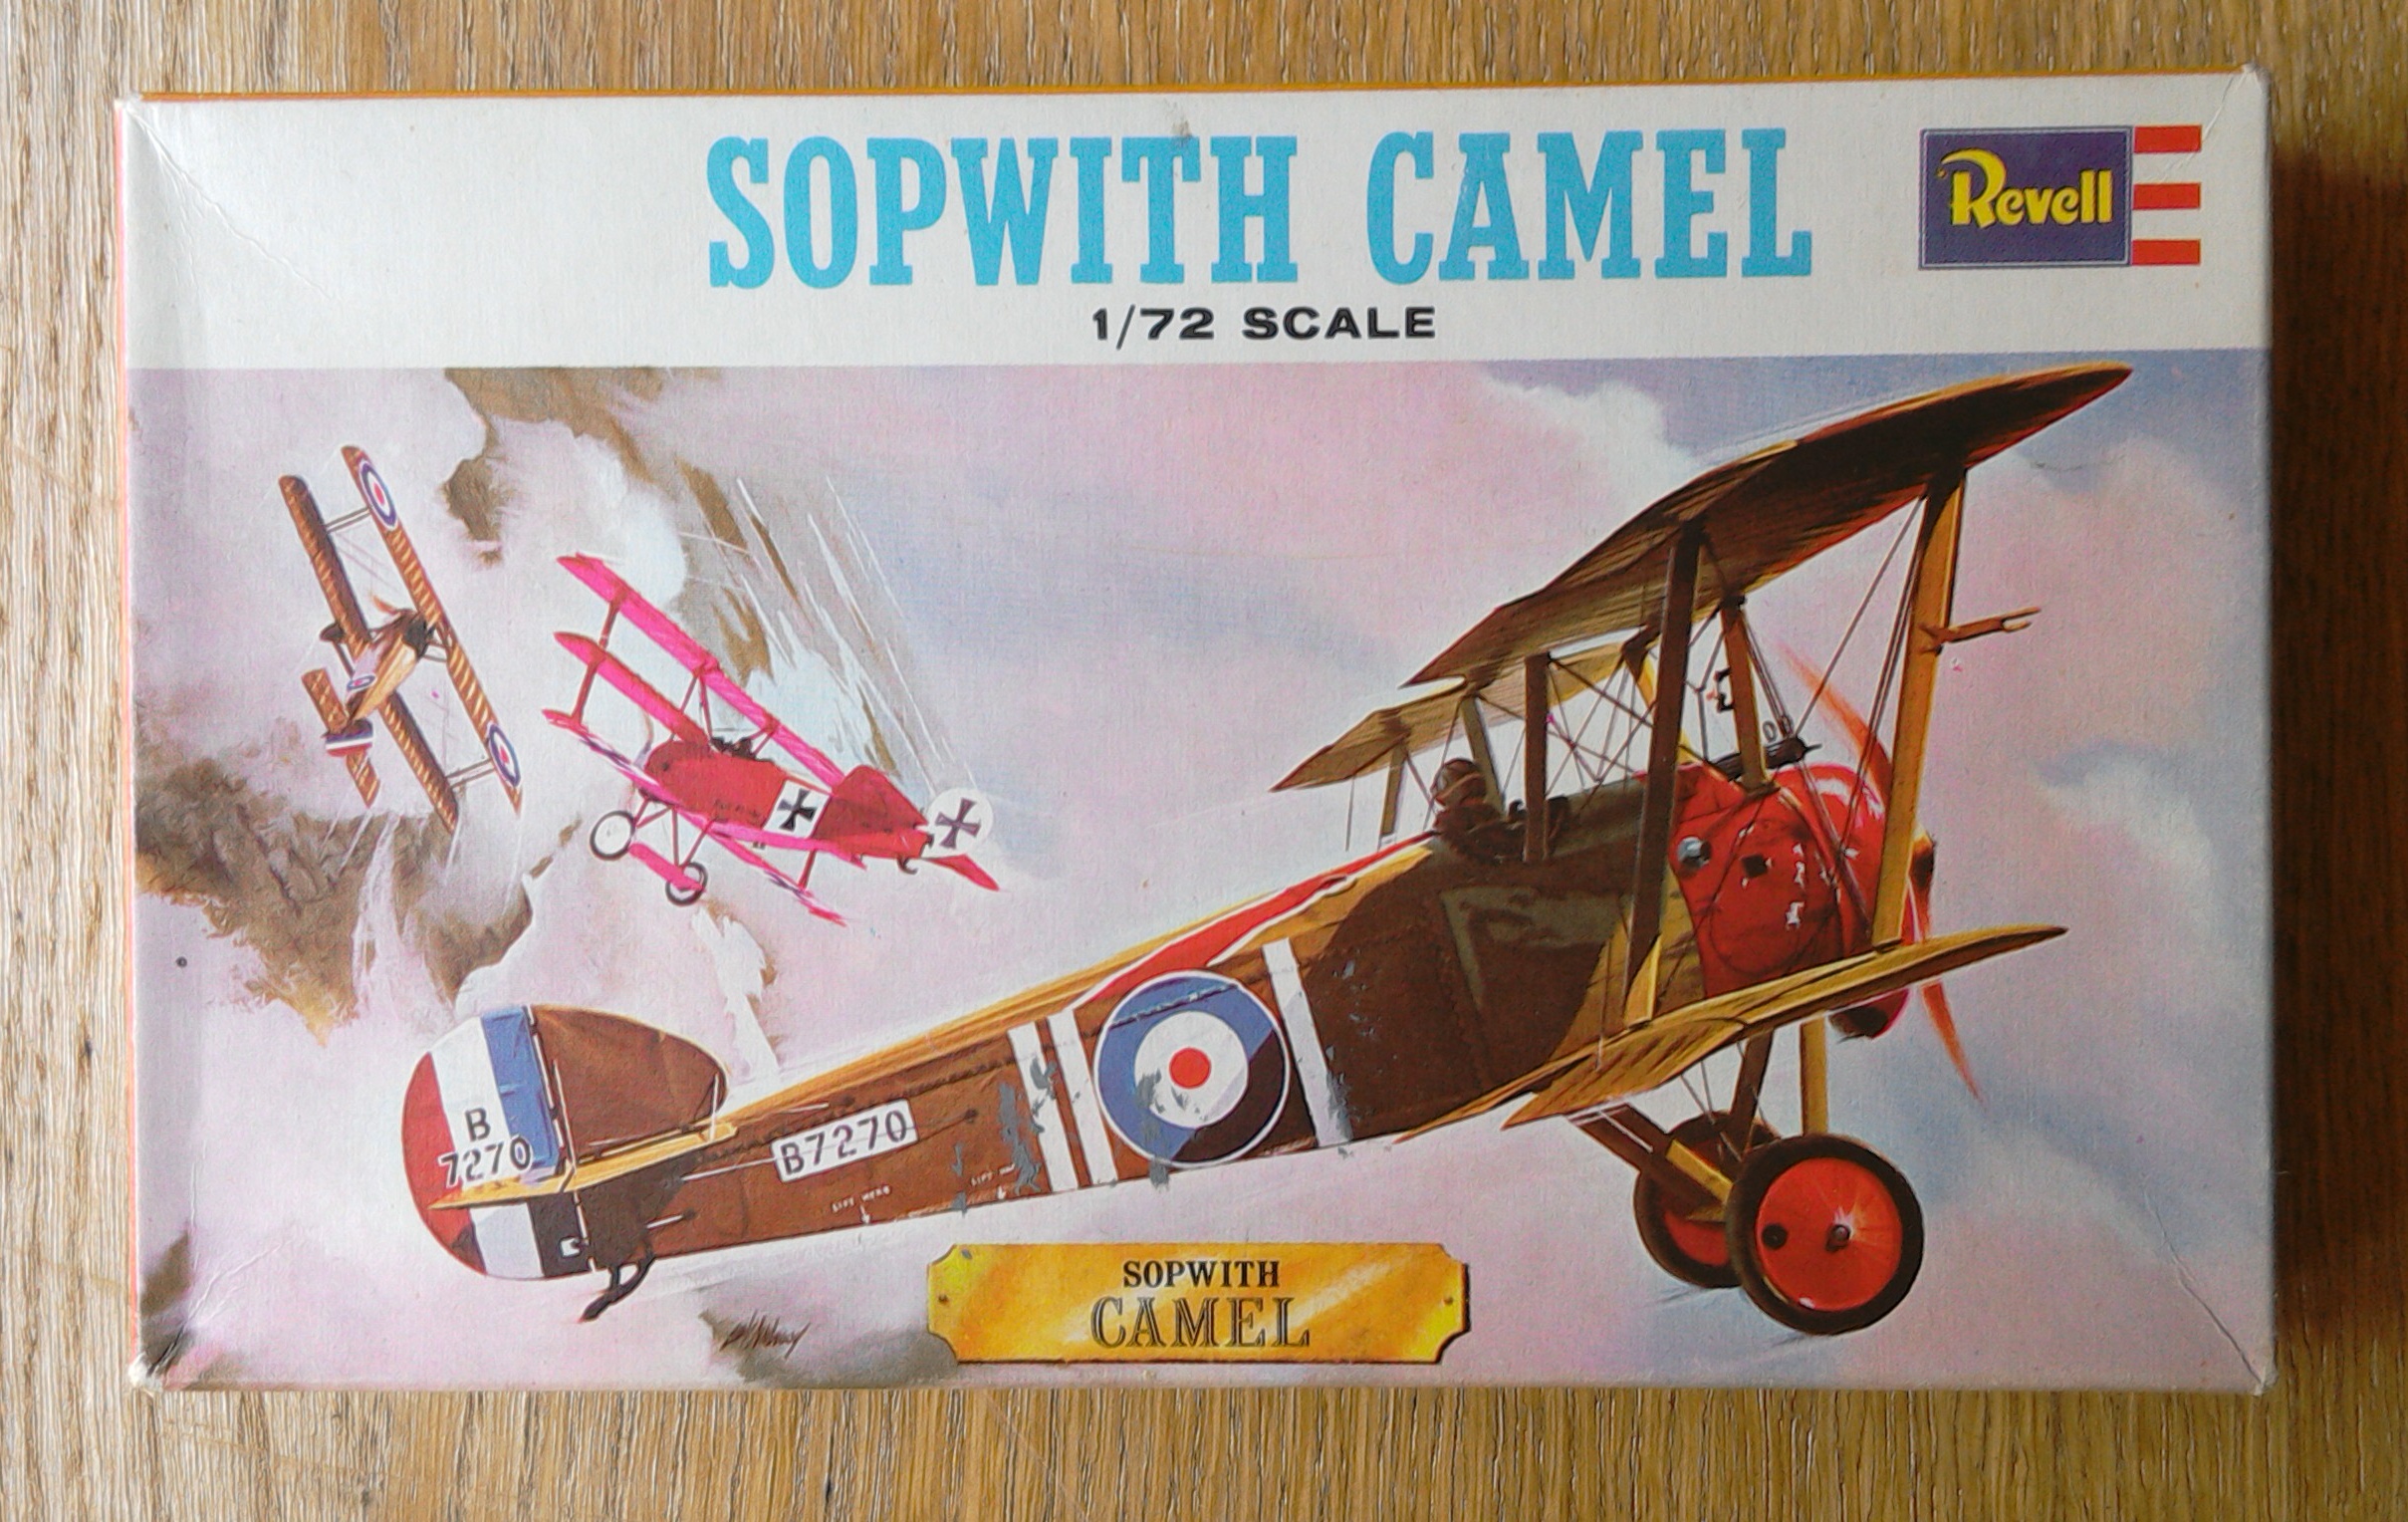 Sopwith Camell - Revell